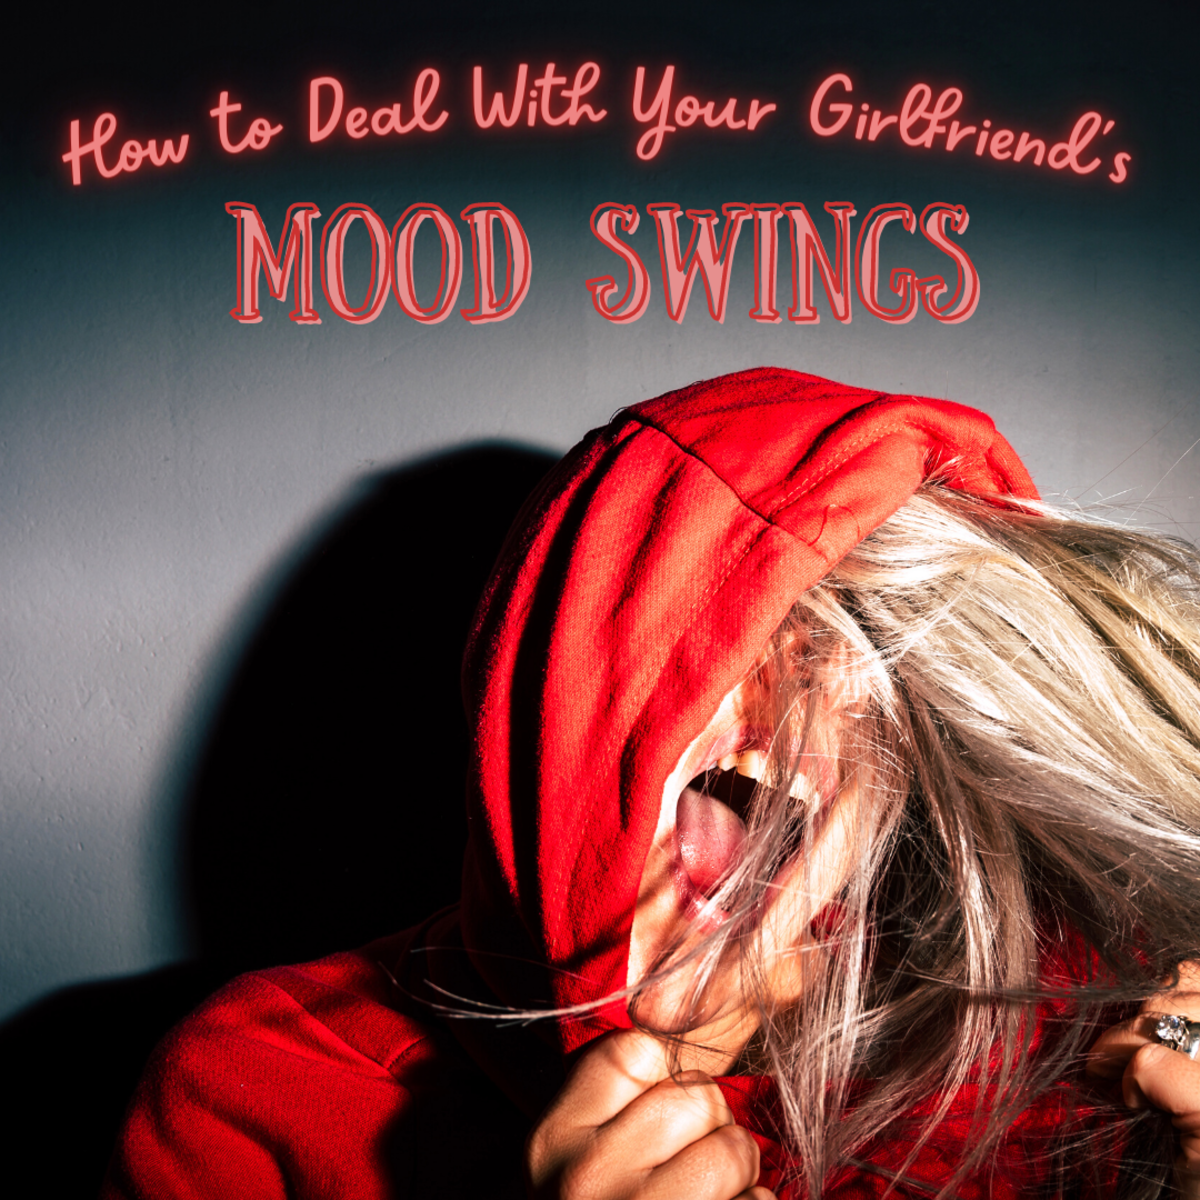 How to Deal With Your Girlfriend or Wife's Mood Swings